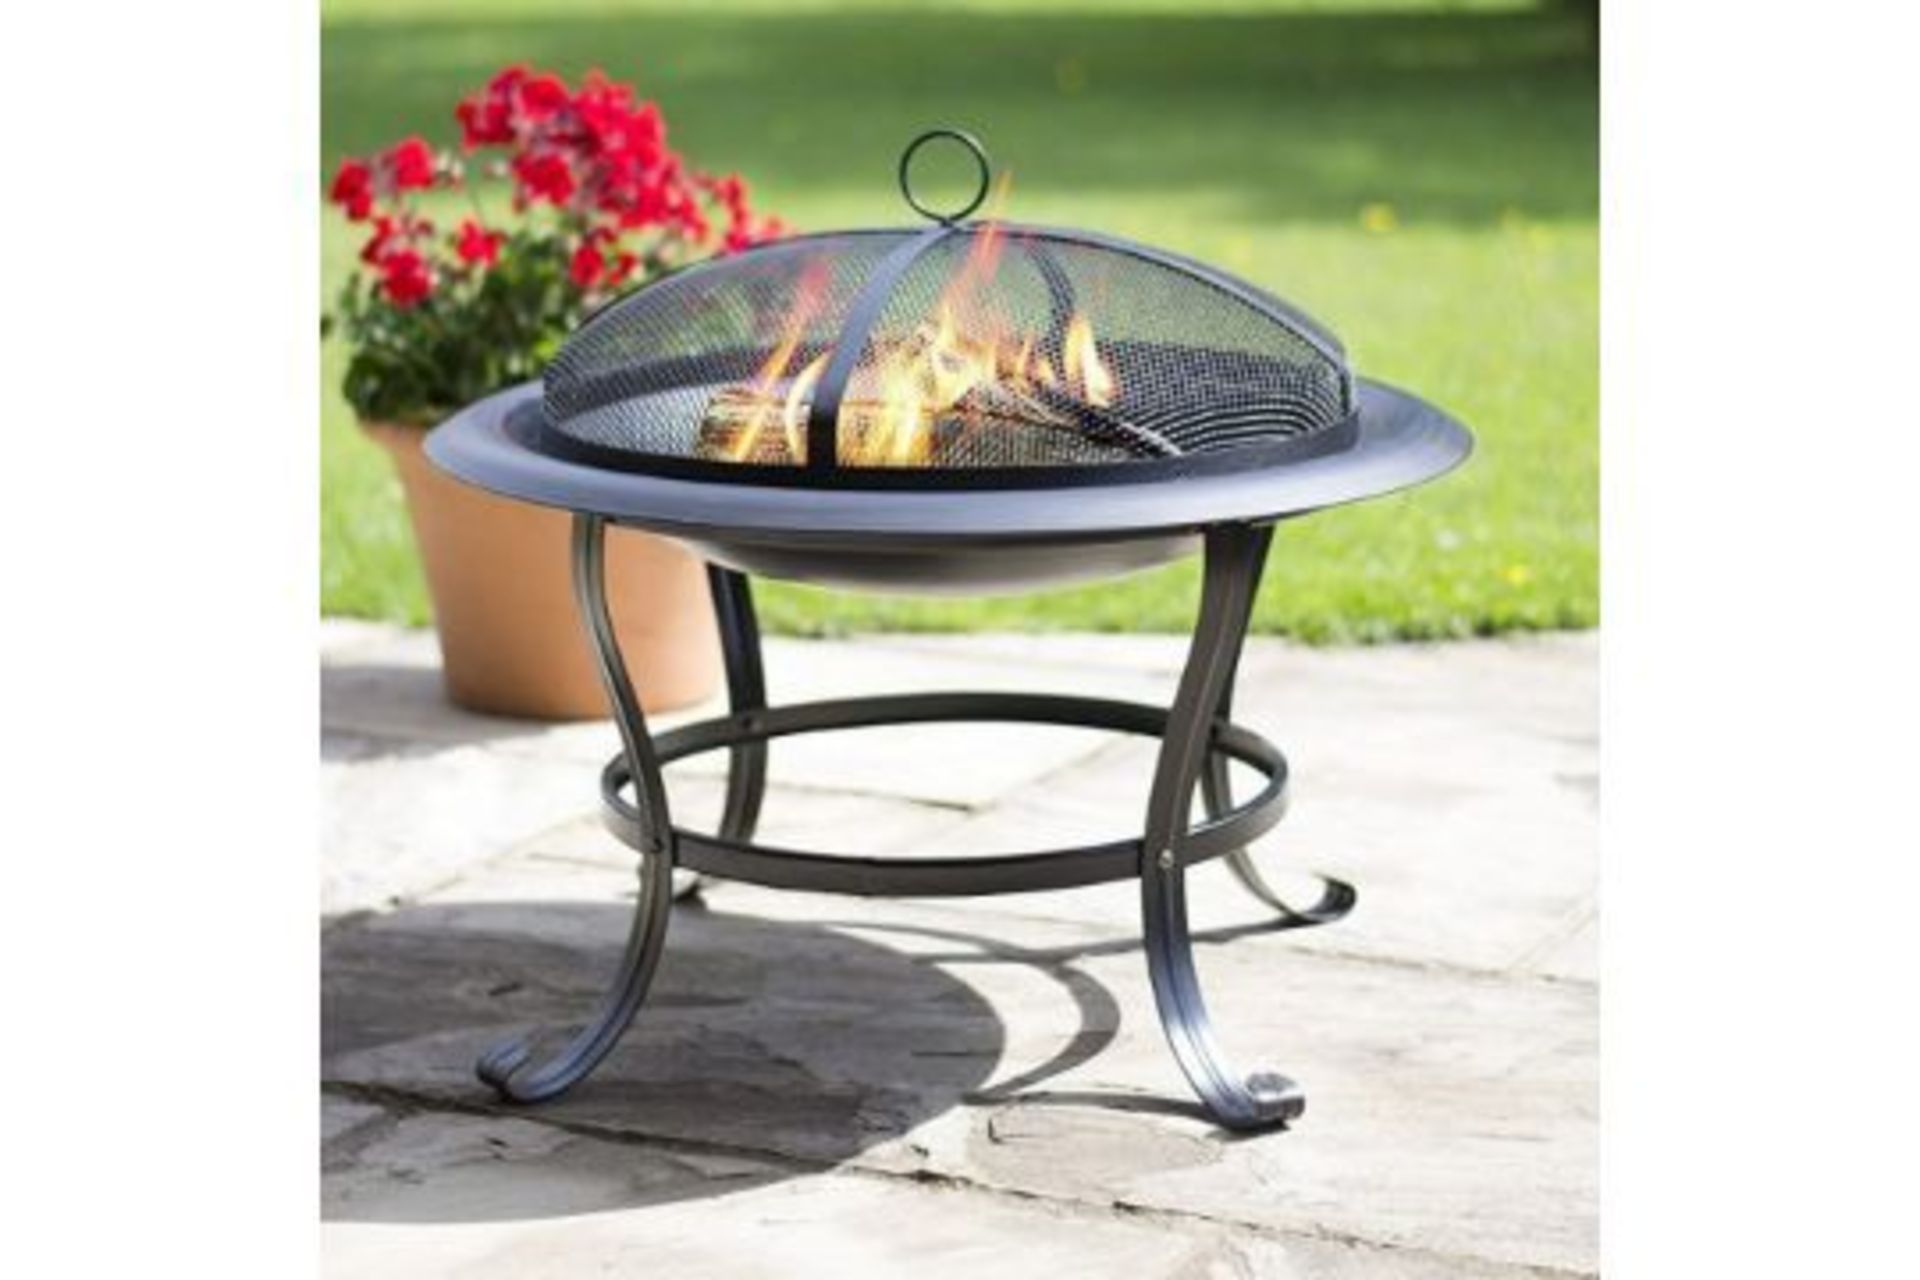 PALLET TO CONTAIN 5 x New Boxed STEEL FIRE PIT BOWL WITH MESH LID & COOKING GRILL. This stylish